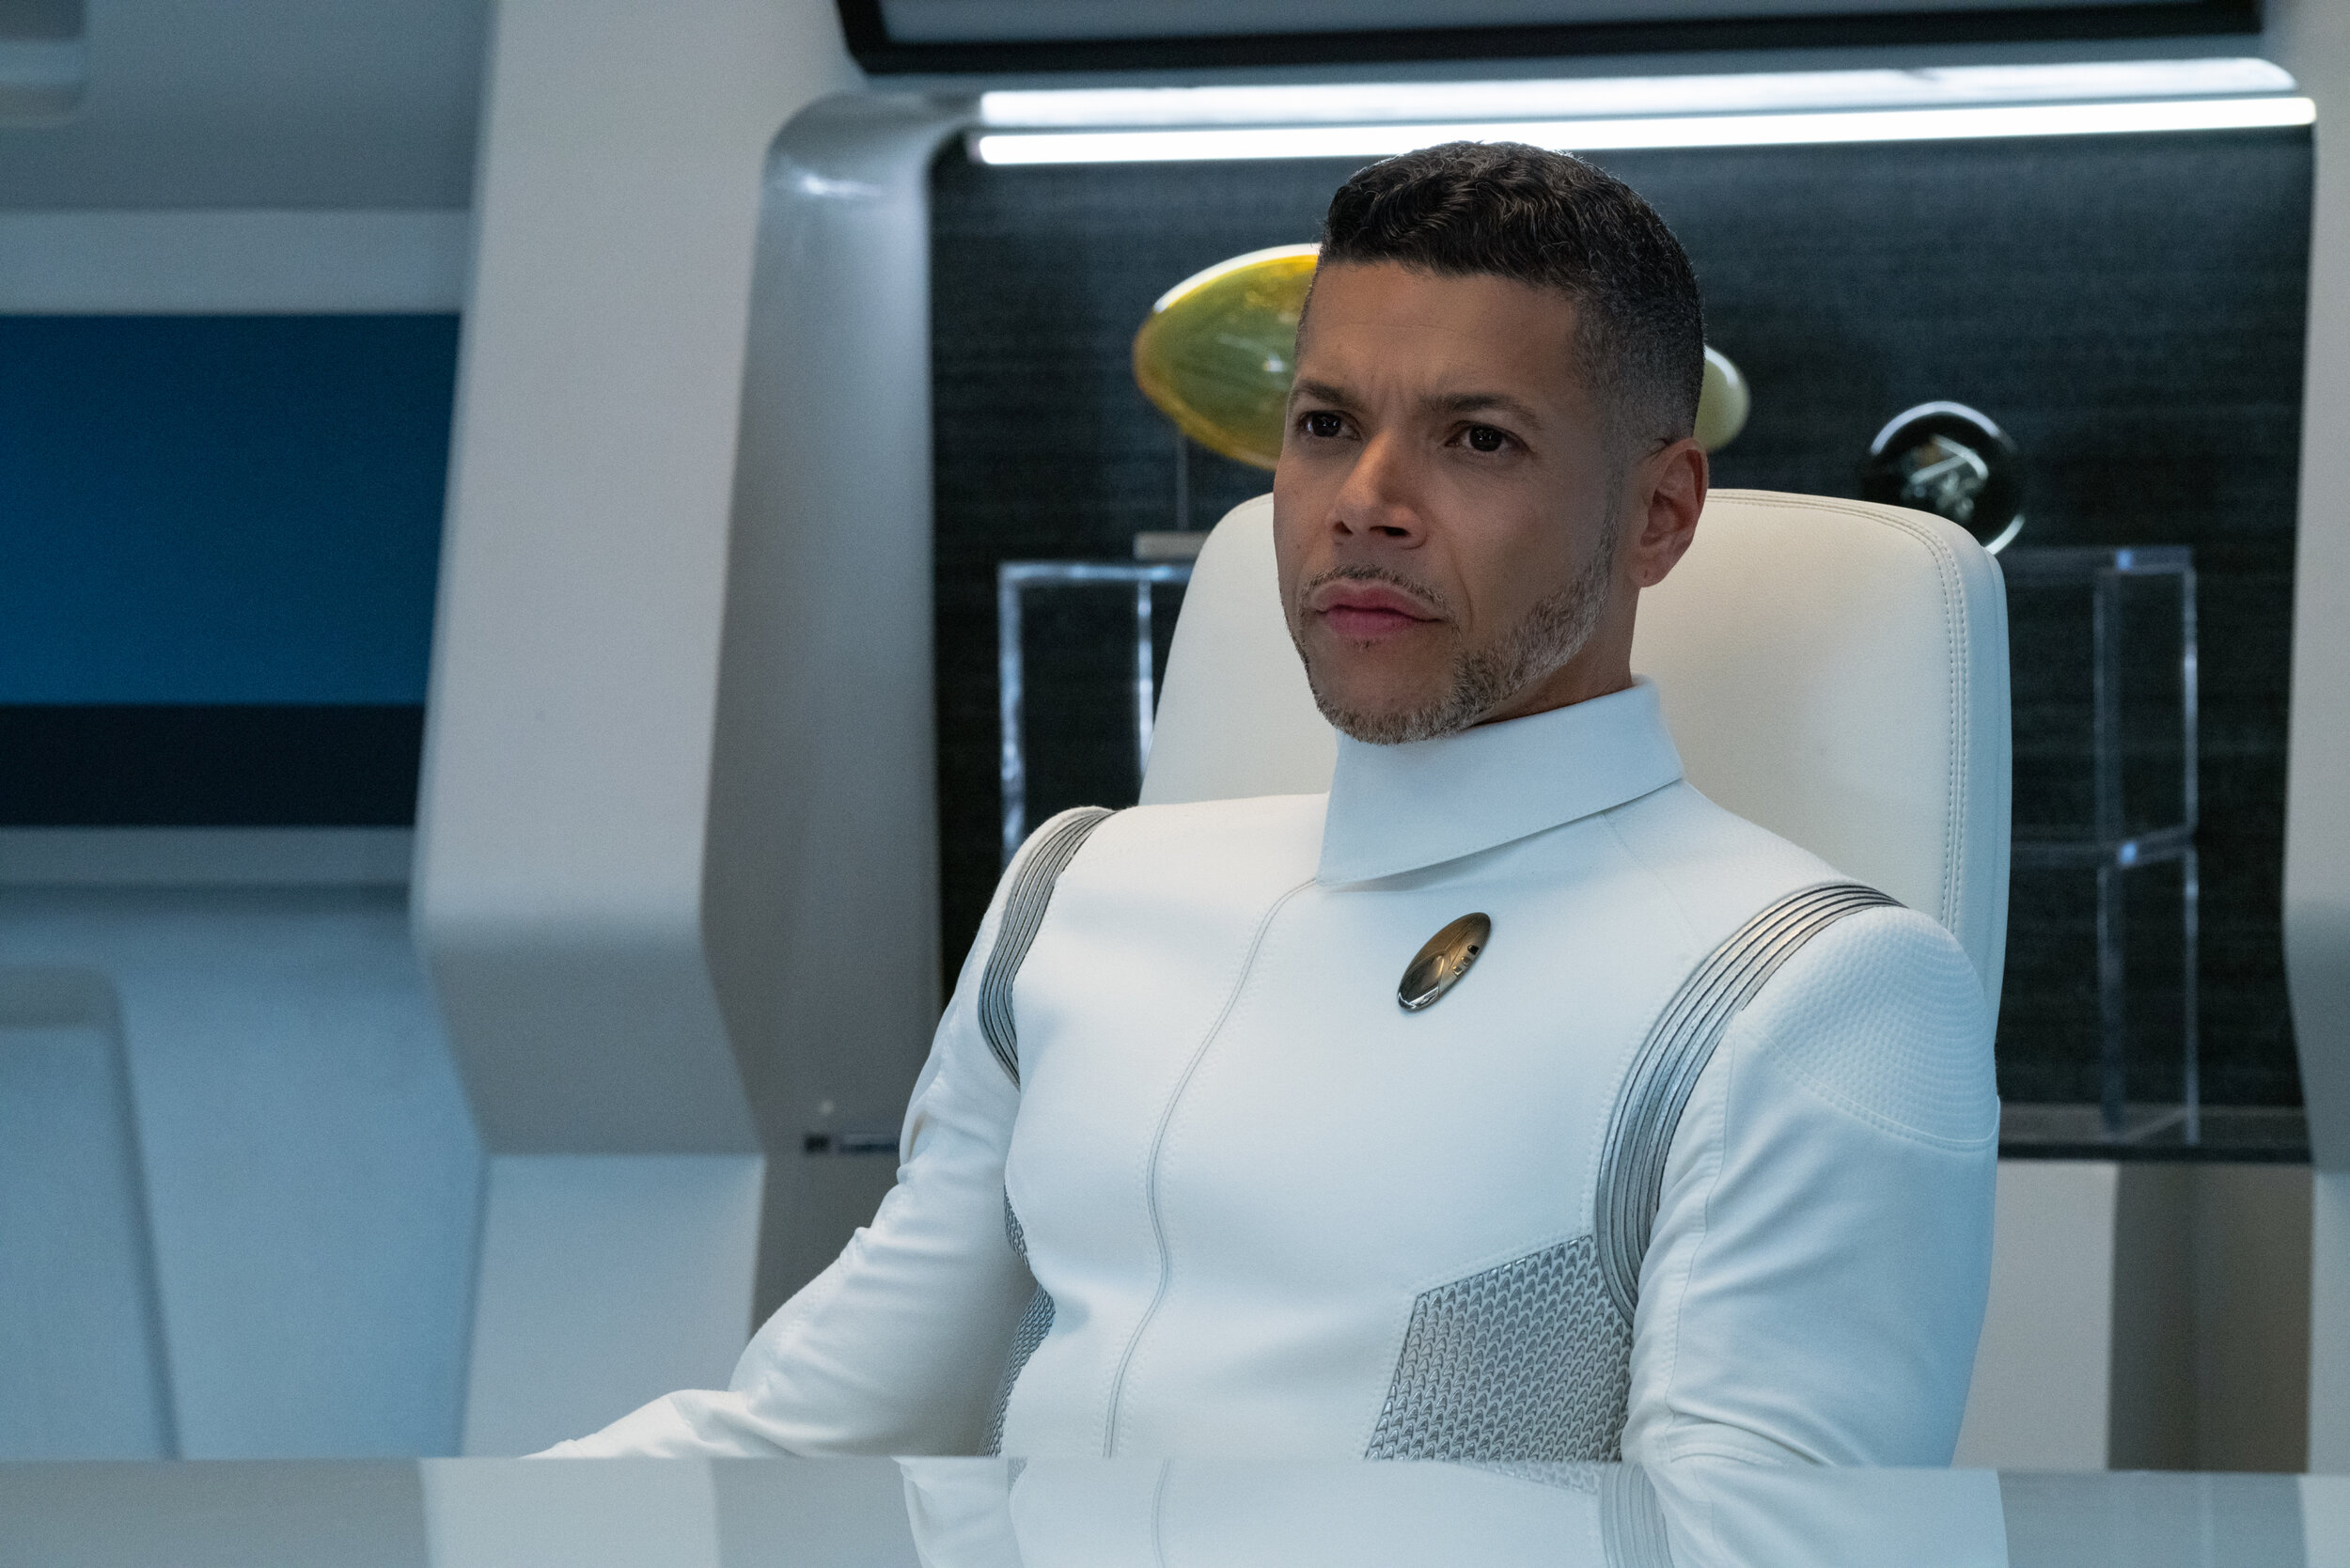   "The Sanctuary" -- Ep#308 -- Pictured: Wilson Cruz as Dr. Hugh Culber of the CBS All Access series STAR TREK: DISCOVERY. Photo Cr: Michael Gibson/CBS ©2020 CBS Interactive, Inc. All Rights Reserved.  